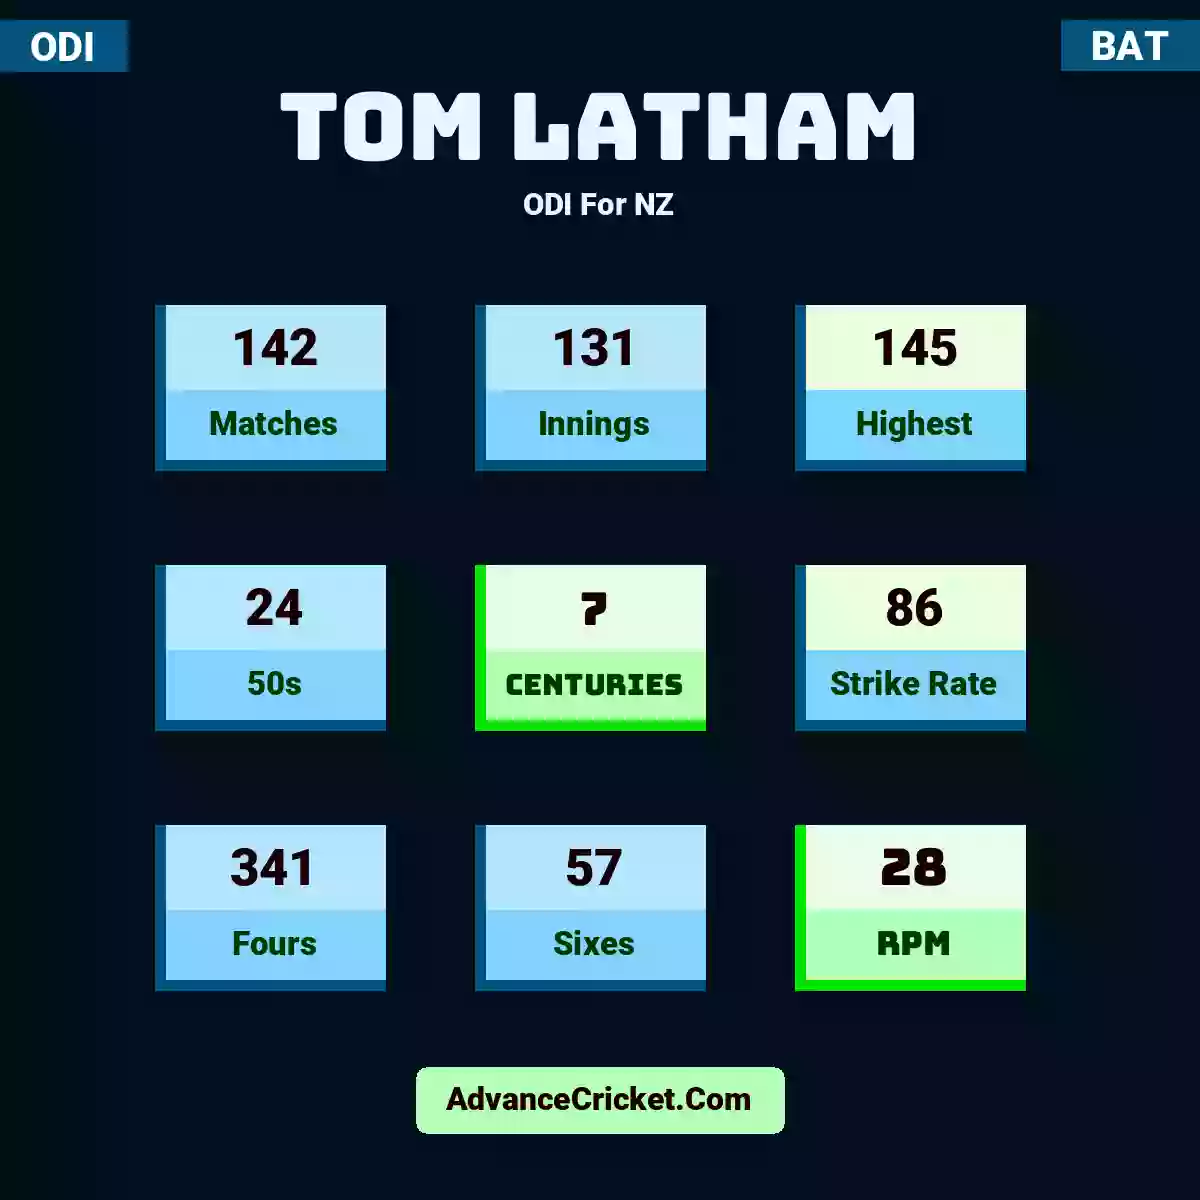 Tom Latham ODI  For NZ, Tom Latham played 142 matches, scored 145 runs as highest, 24 half-centuries, and 7 centuries, with a strike rate of 86. T.Latham hit 341 fours and 57 sixes, with an RPM of 28.